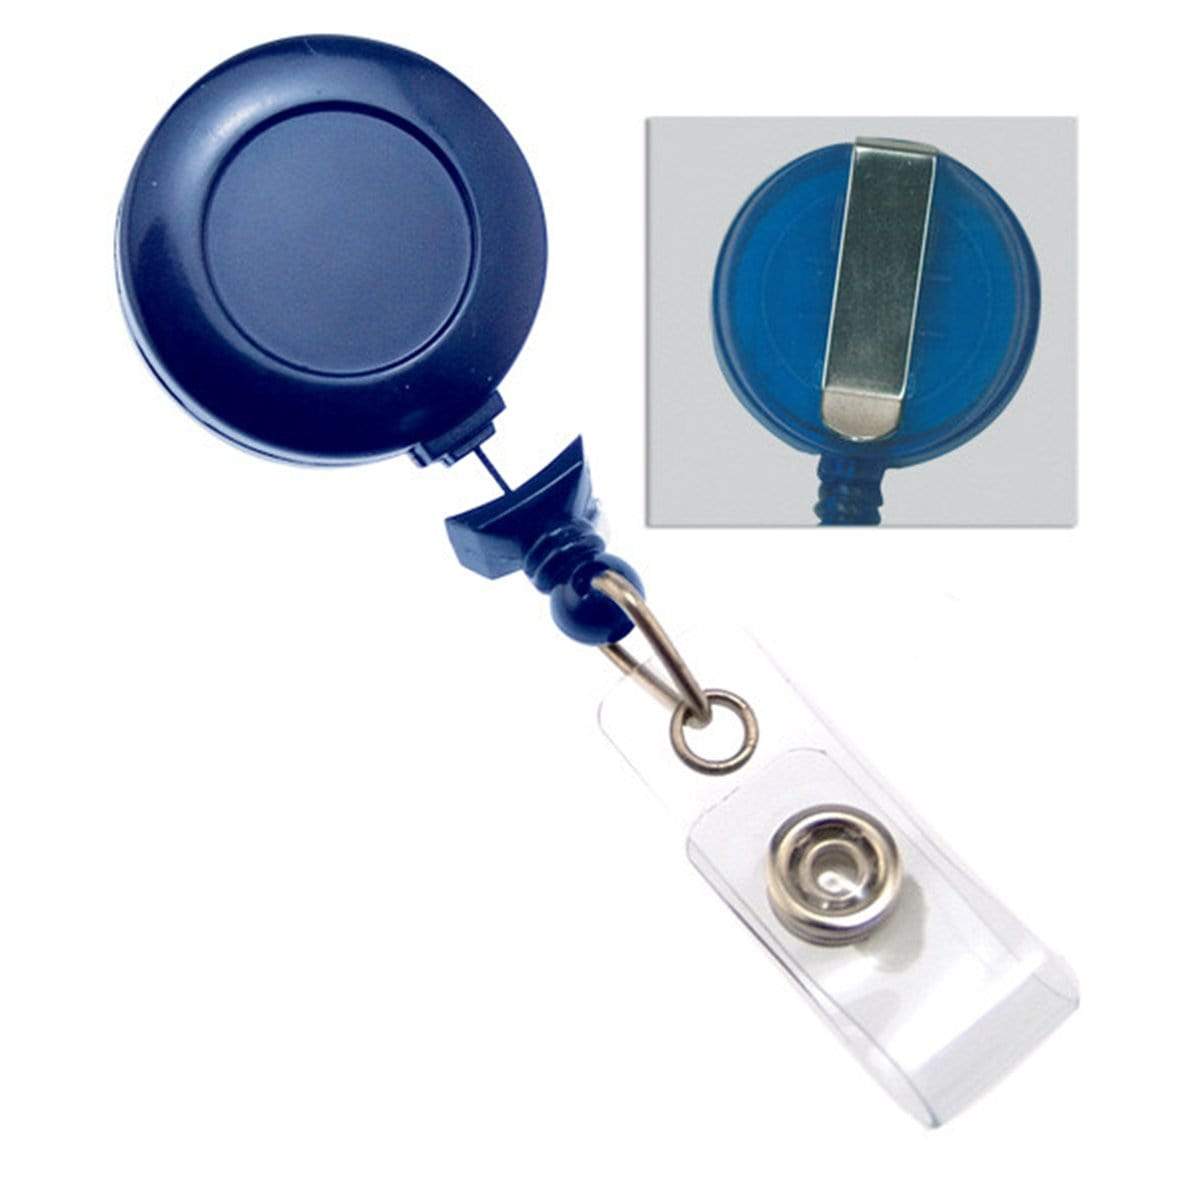 Navy blue "No Twist" Badge Reel With Clear Vinyl Strap And Belt Clip (P/N 2120-305X) 2120-3051